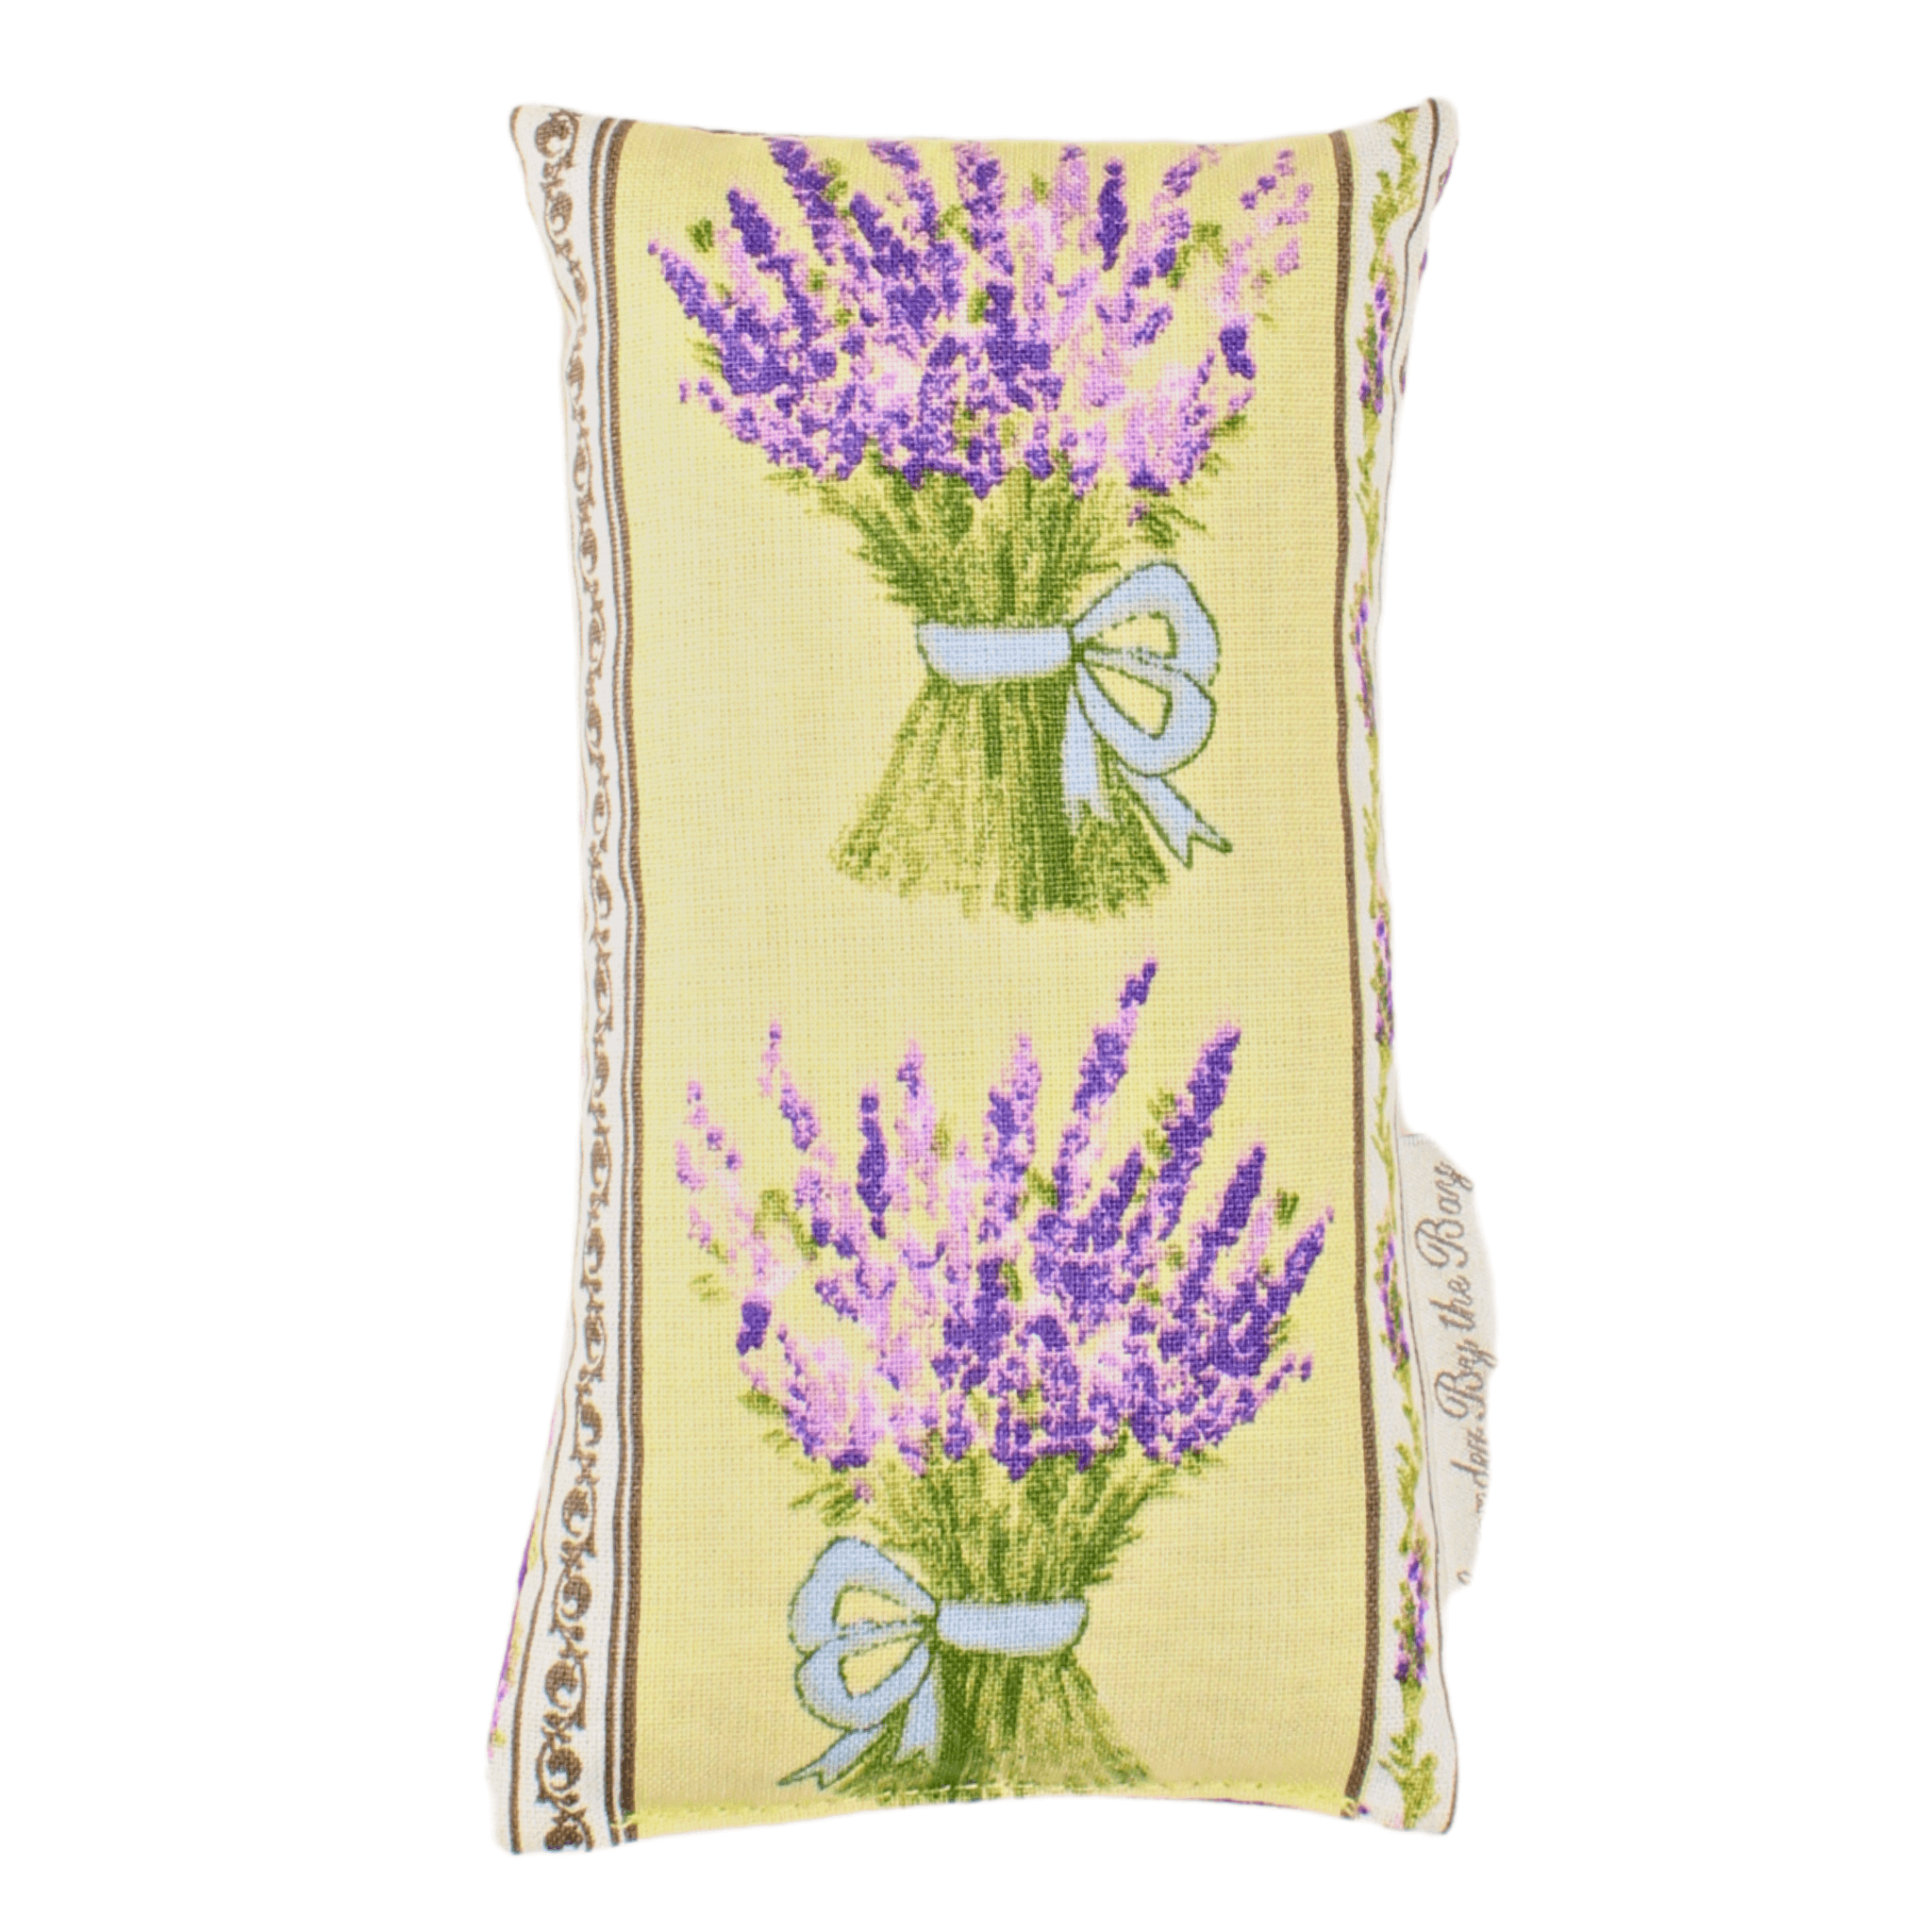 https://cdn.shopify.com/s/files/1/1228/1034/products/lavender-bouquet-on-yellow-sachet-lavender-by-the-bay.png?v=1665242144&width=2048